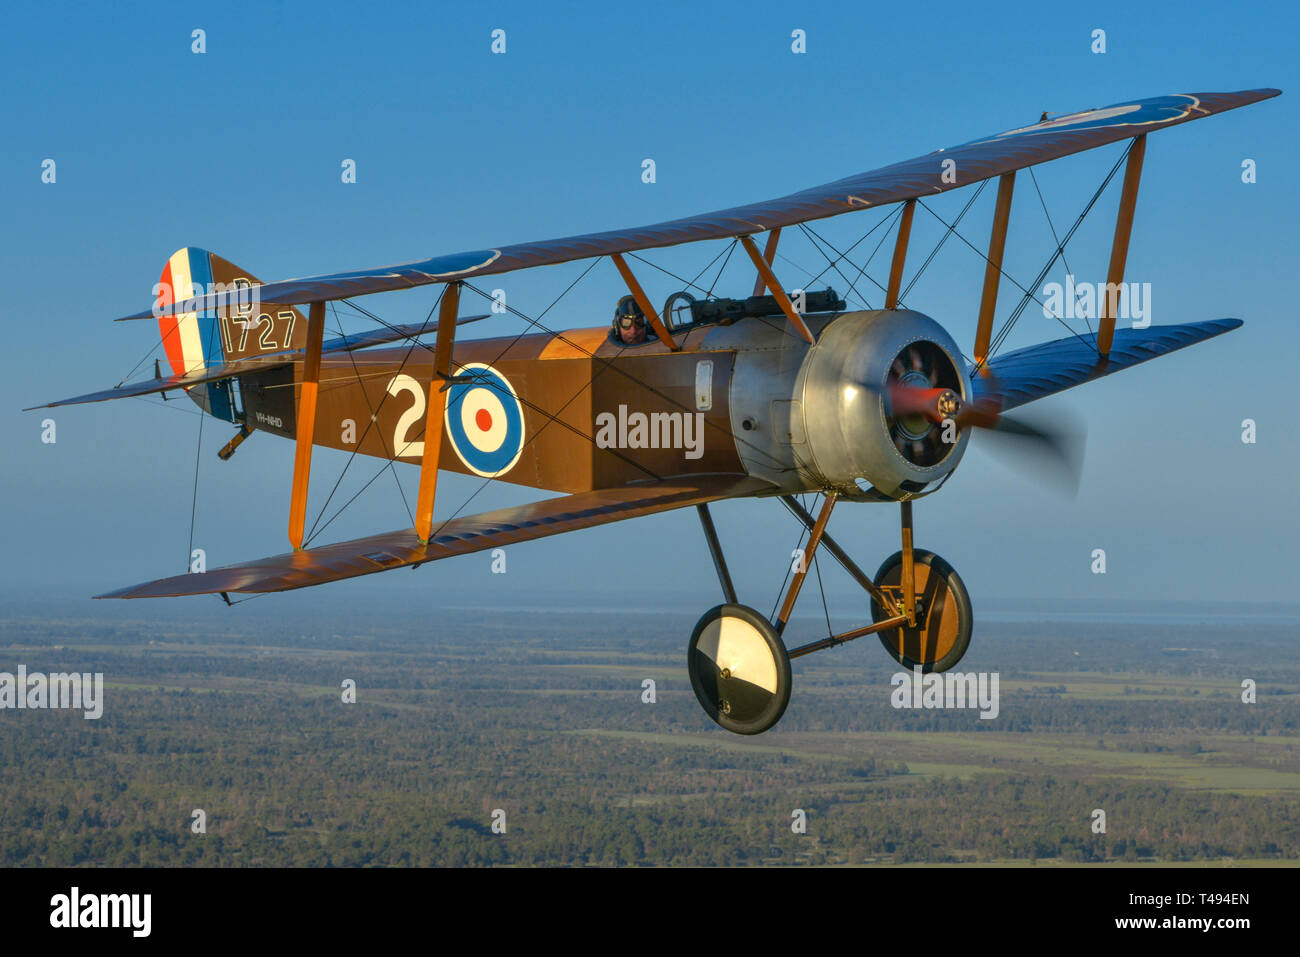 Air to air photo shoot of a First World War Sopwith Pup biplane, Serpentine airfield, Western Australia. The aircraft is banking towards the camera. Stock Photo